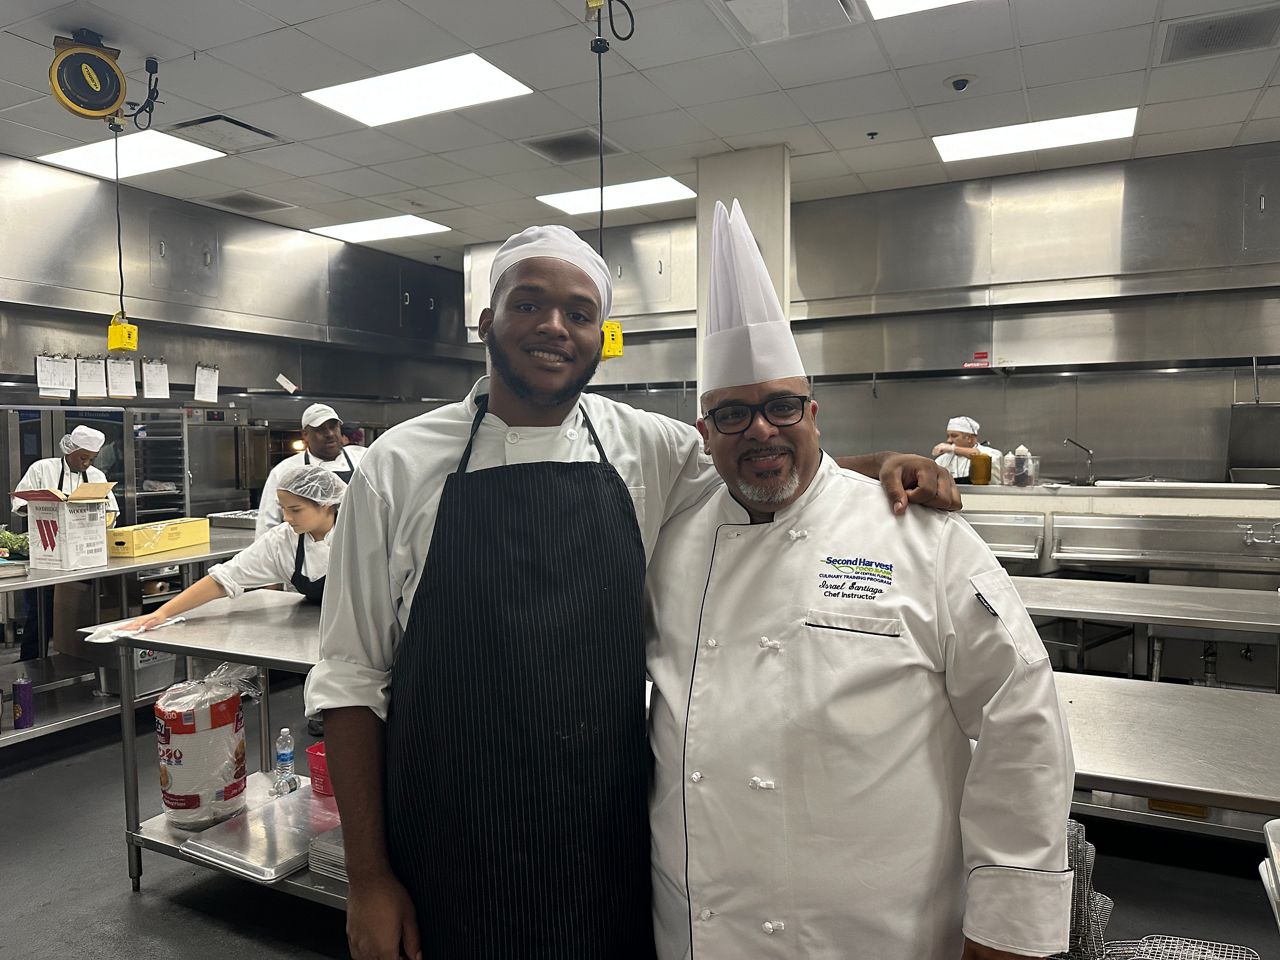 Dezmond Siracusa (left) stands with Chef Israel Santiago, who has led Second Harvest Food Bank of Central Florida's free culinary training program since it started 10 years ago. (Spectrum News/Massiel Leyva)